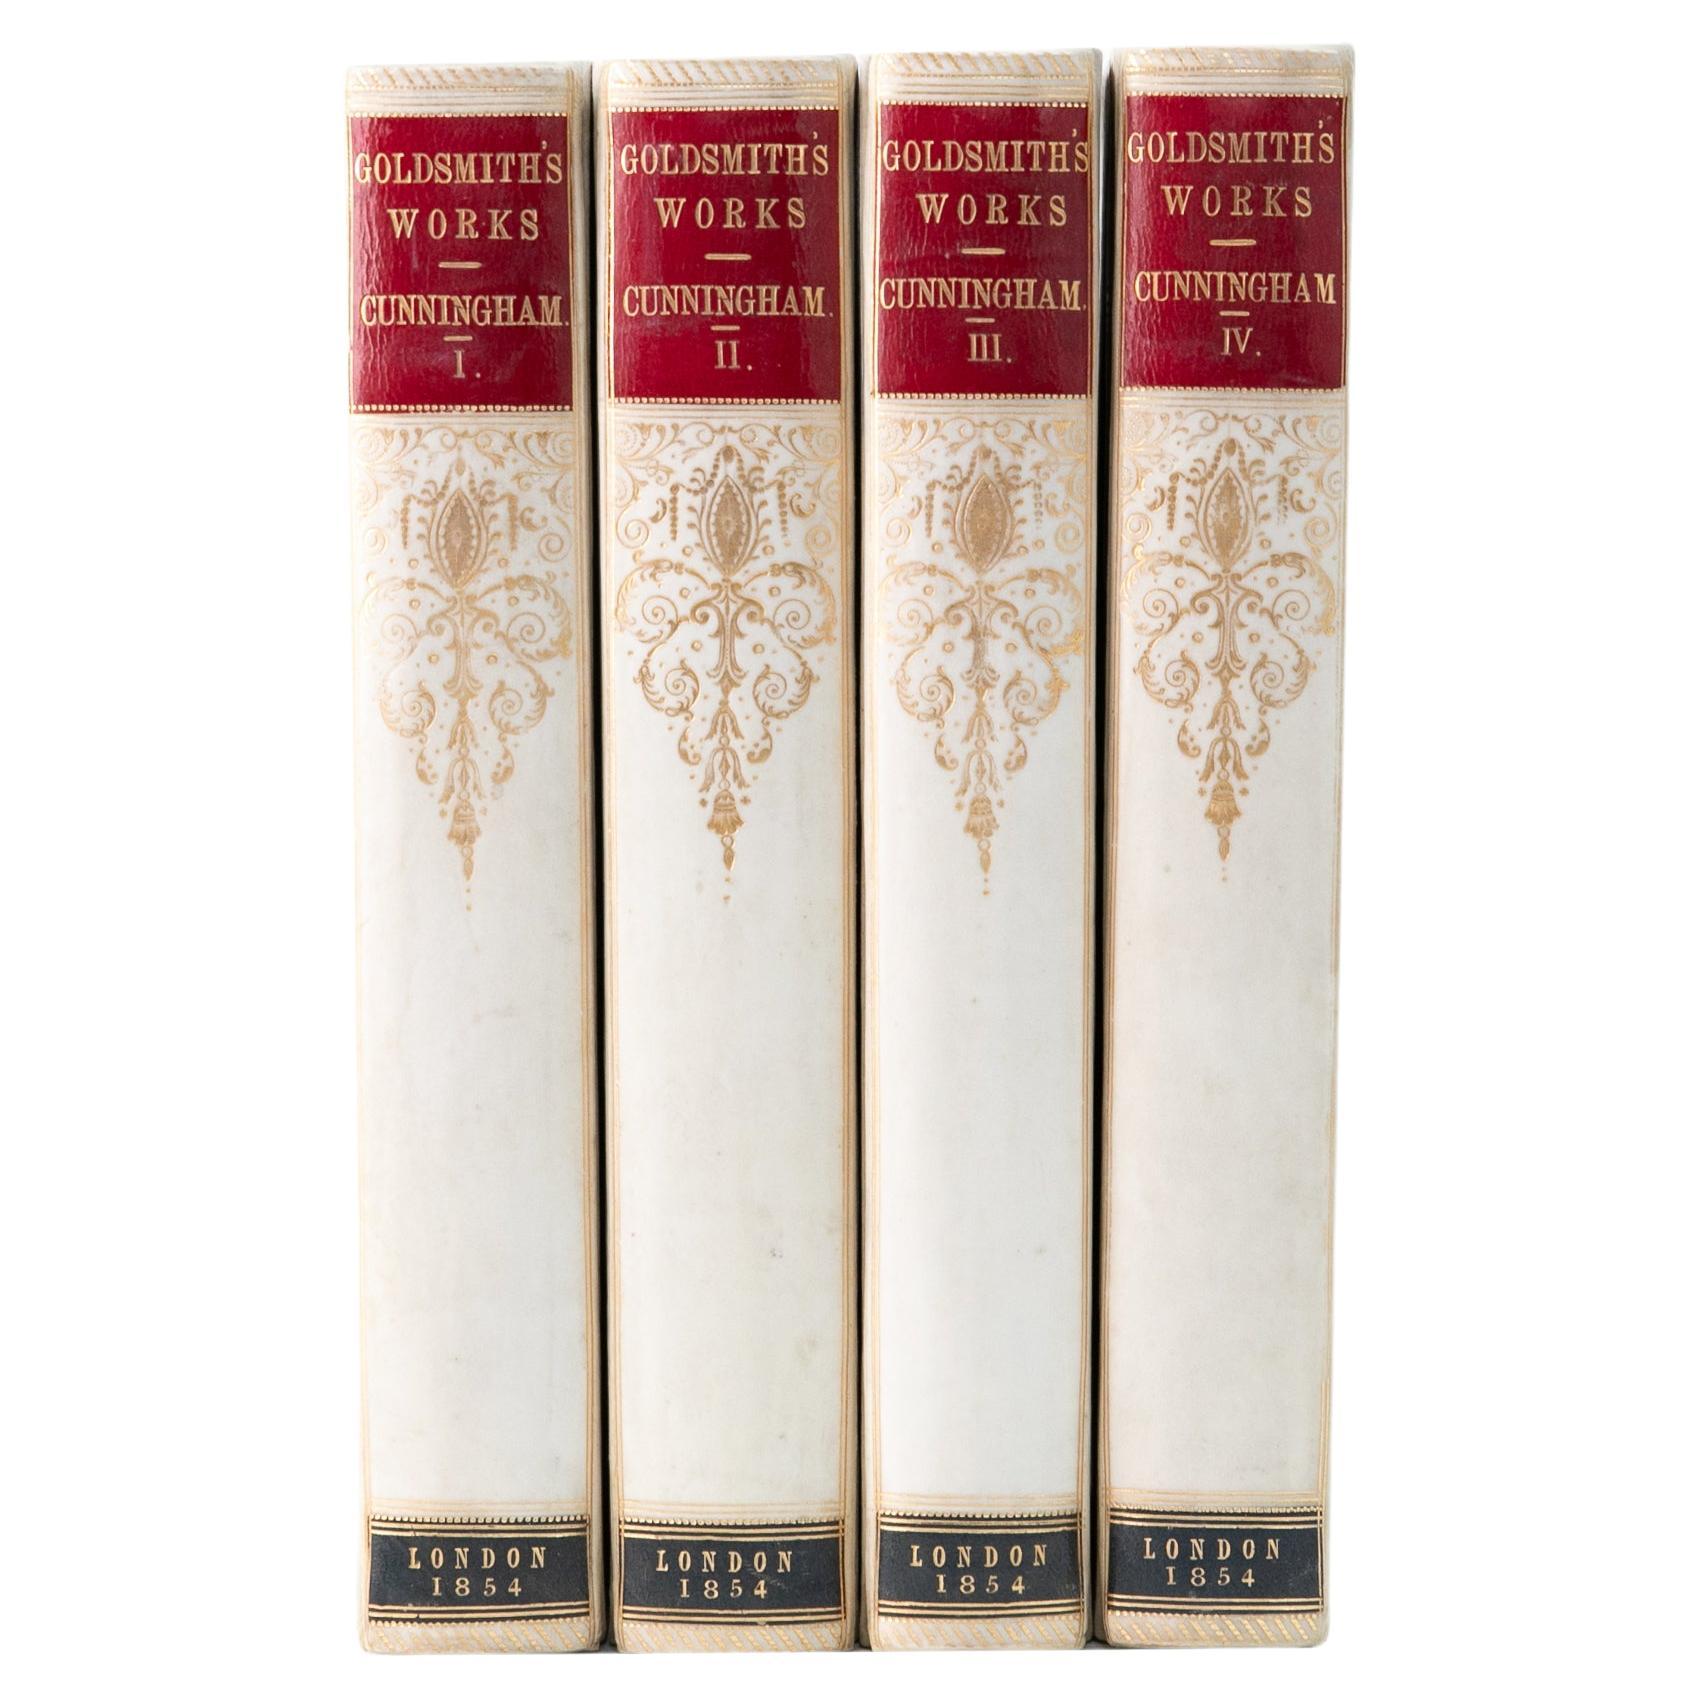 4 Volumes. Oliver Goldsmith, The Works. For Sale